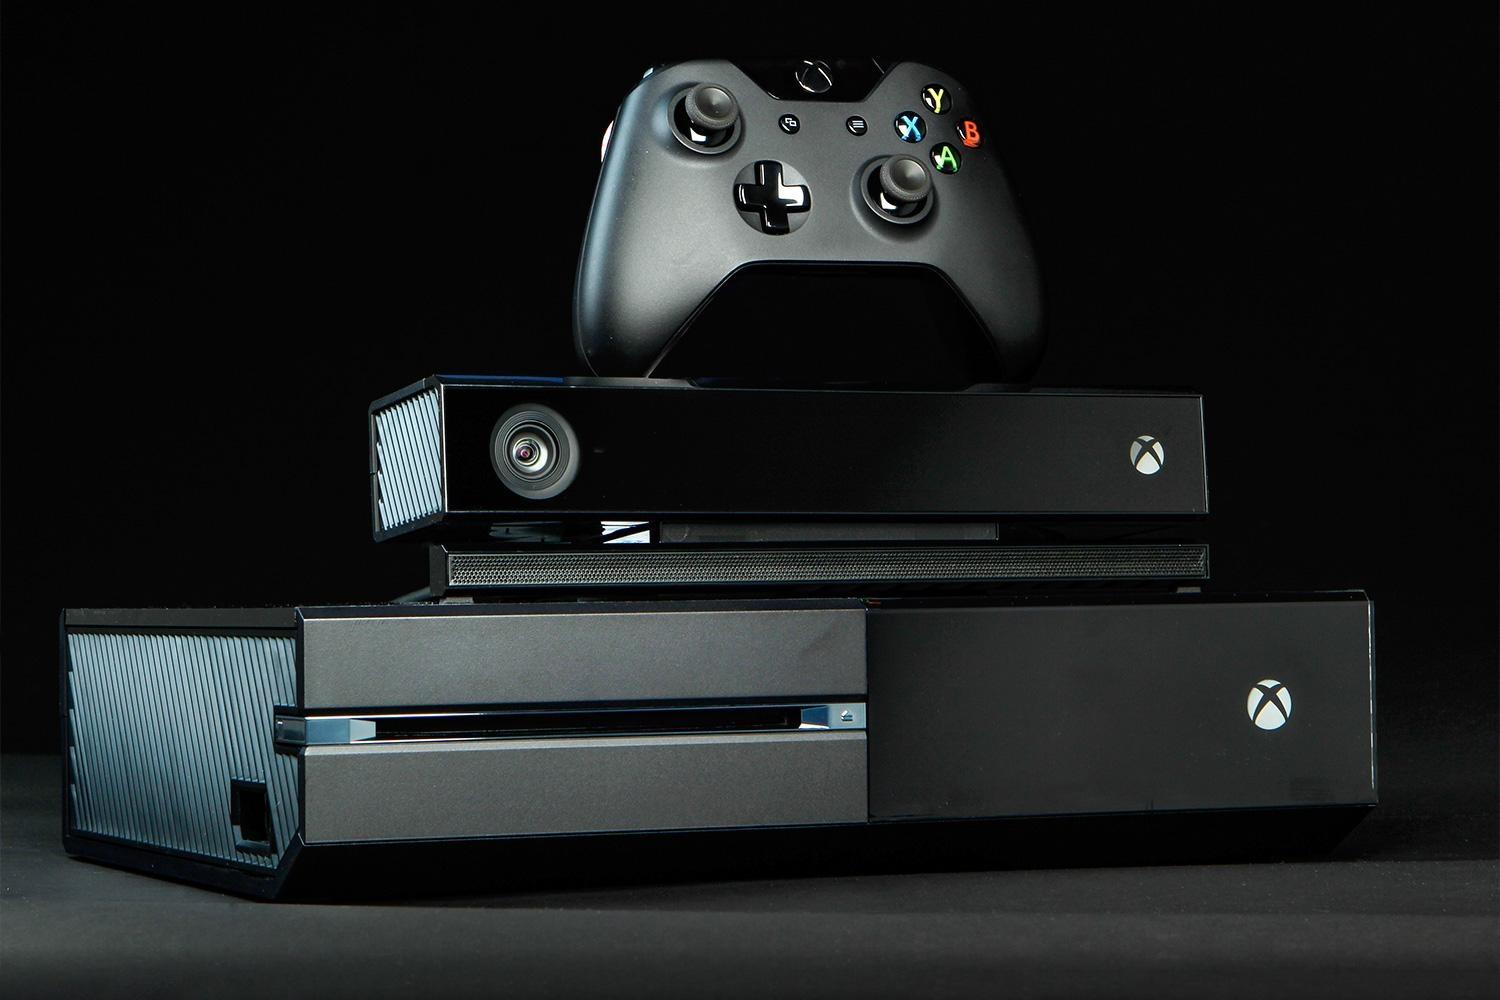 This is the typical Xbox One gamer, according to leaked MS docs